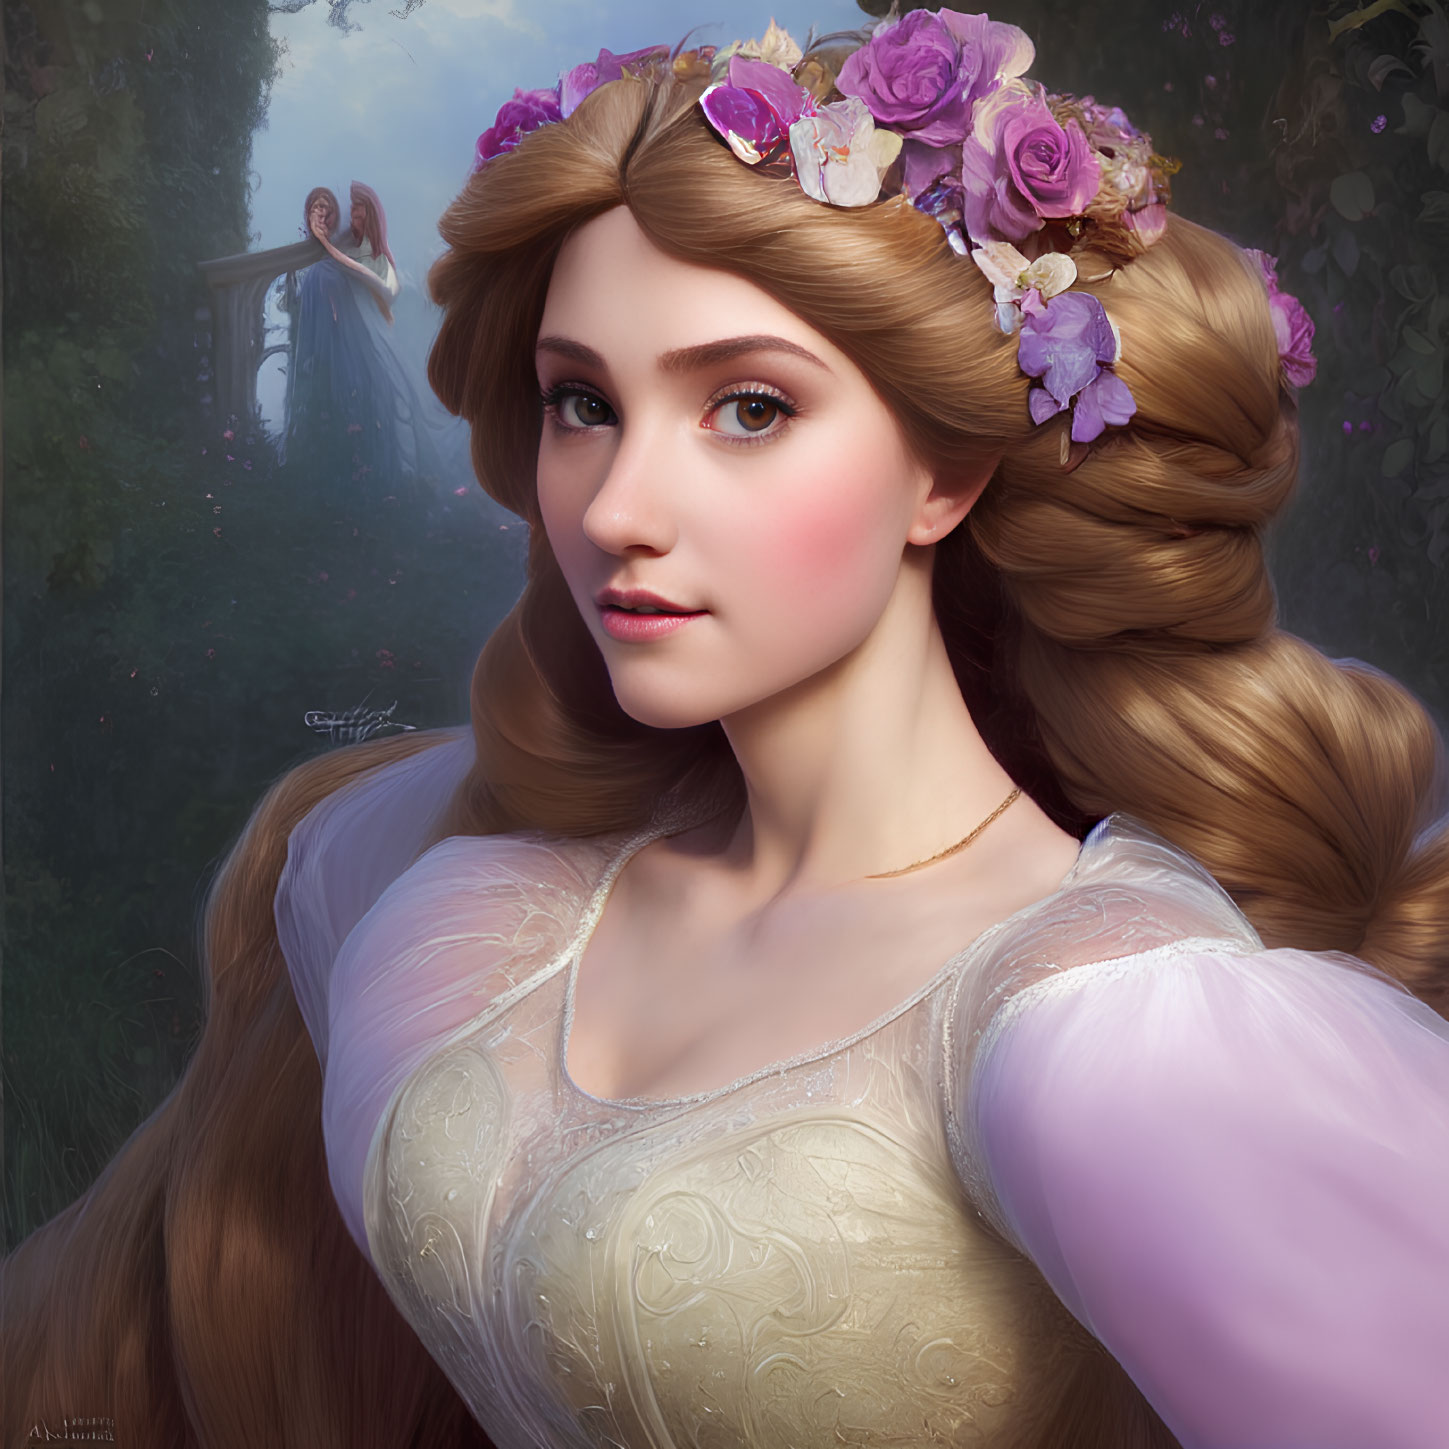 Digital Artwork: Young Woman with Braided Hair and Purple Flower Adornments